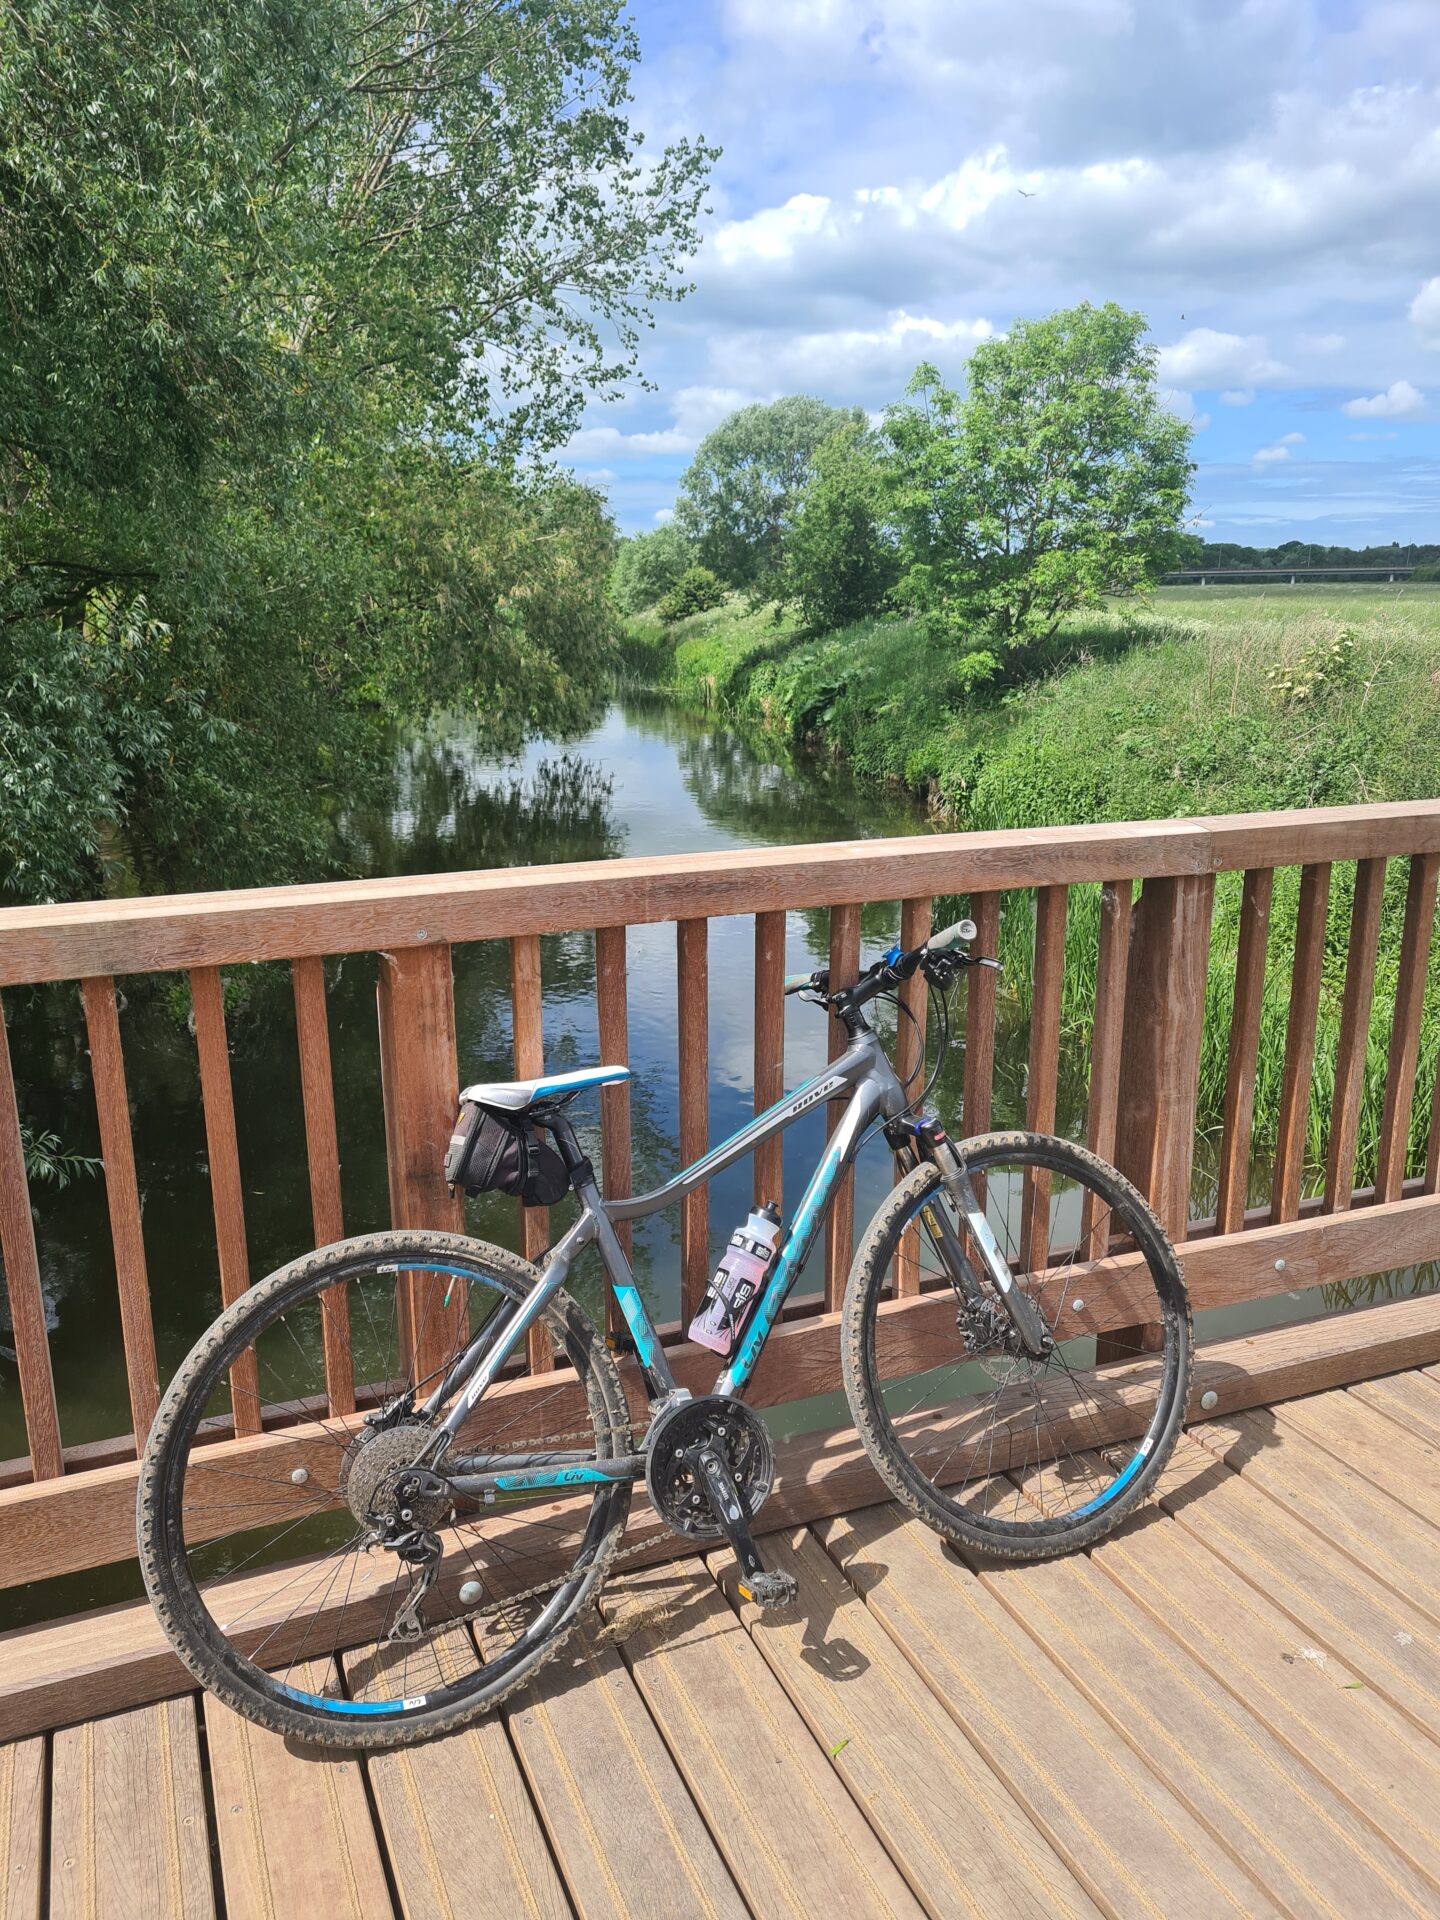 image of a blue and grey bike leaning on the wooden railings of a bridge over a river